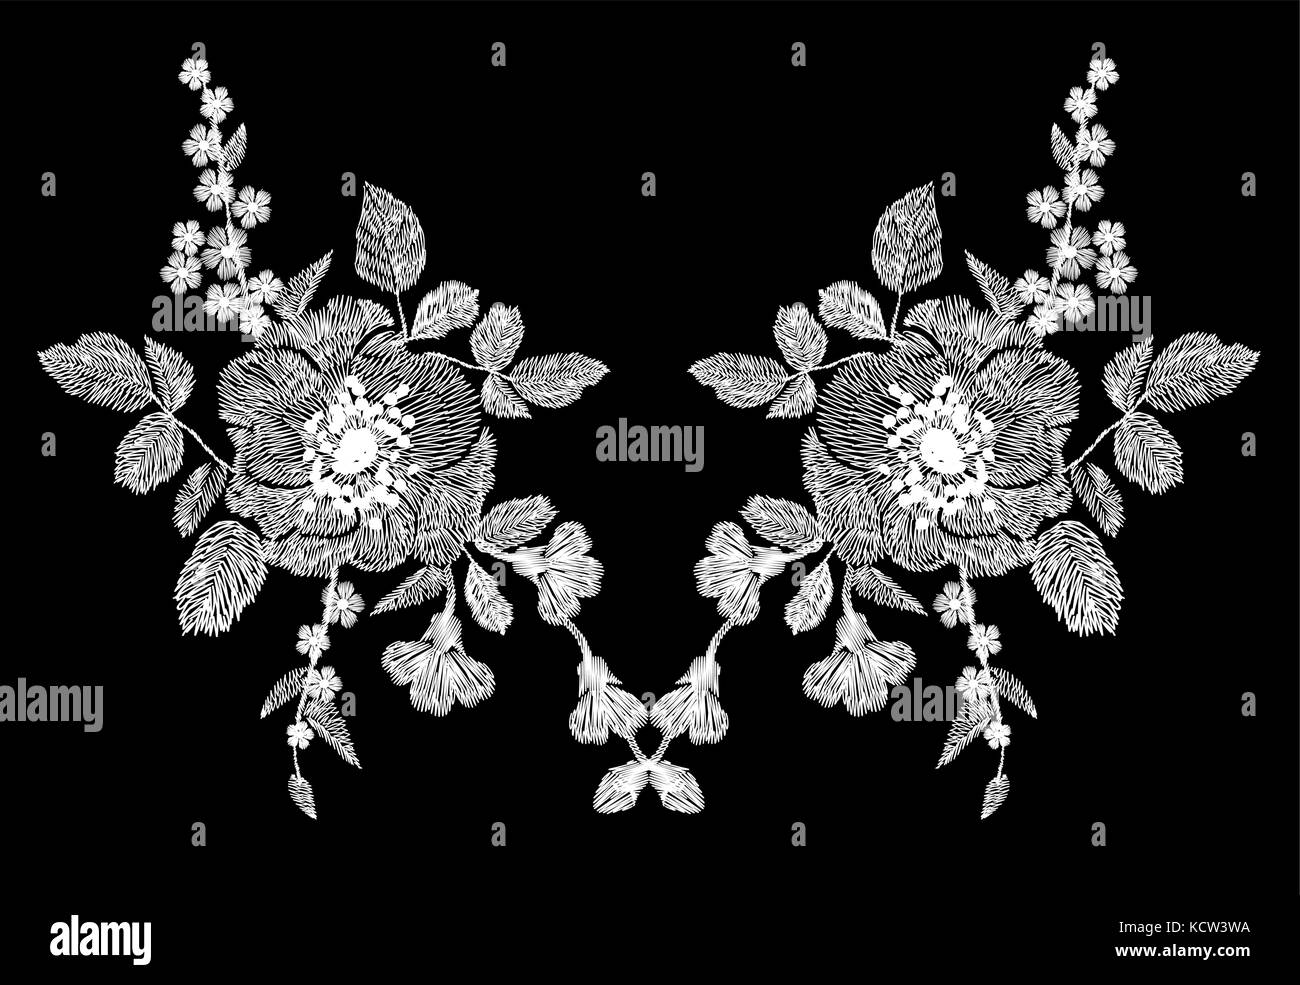 Embroidery white floral pattern with poppy and daisy flowers. Vector traditional folk fashion ornament on black background. illustration Stock Vector